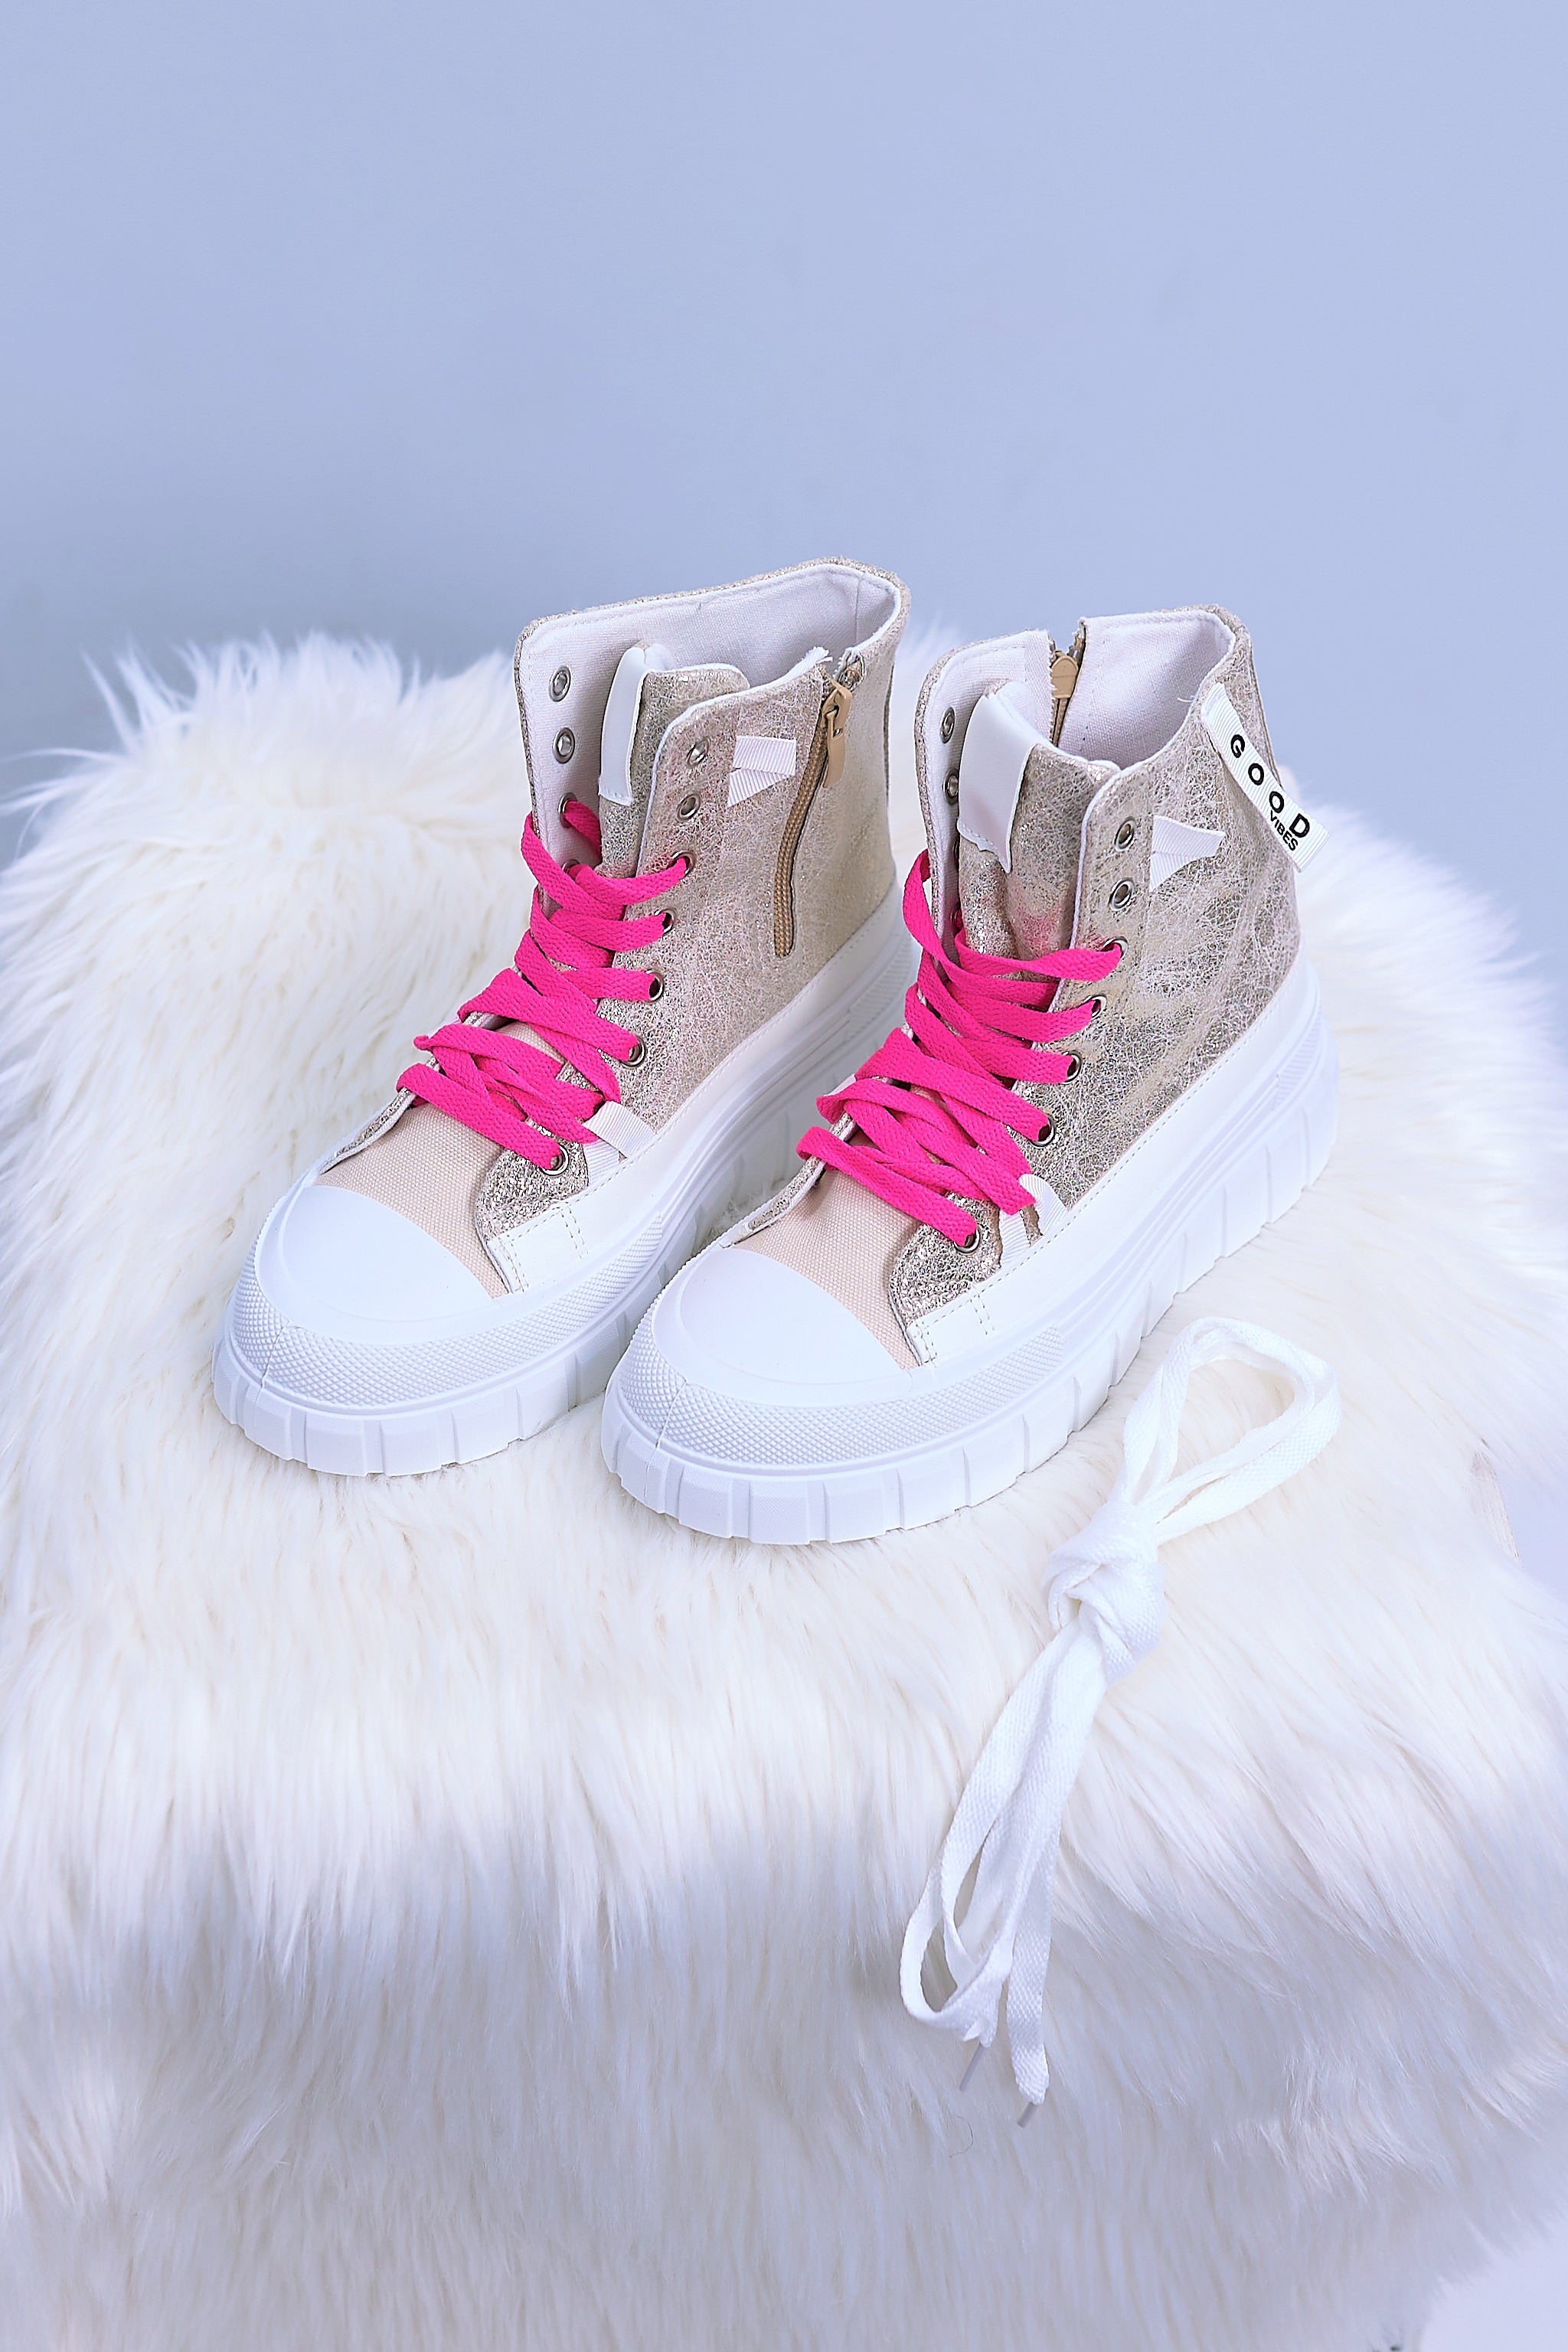 Sneakers with details, gold-white-pink